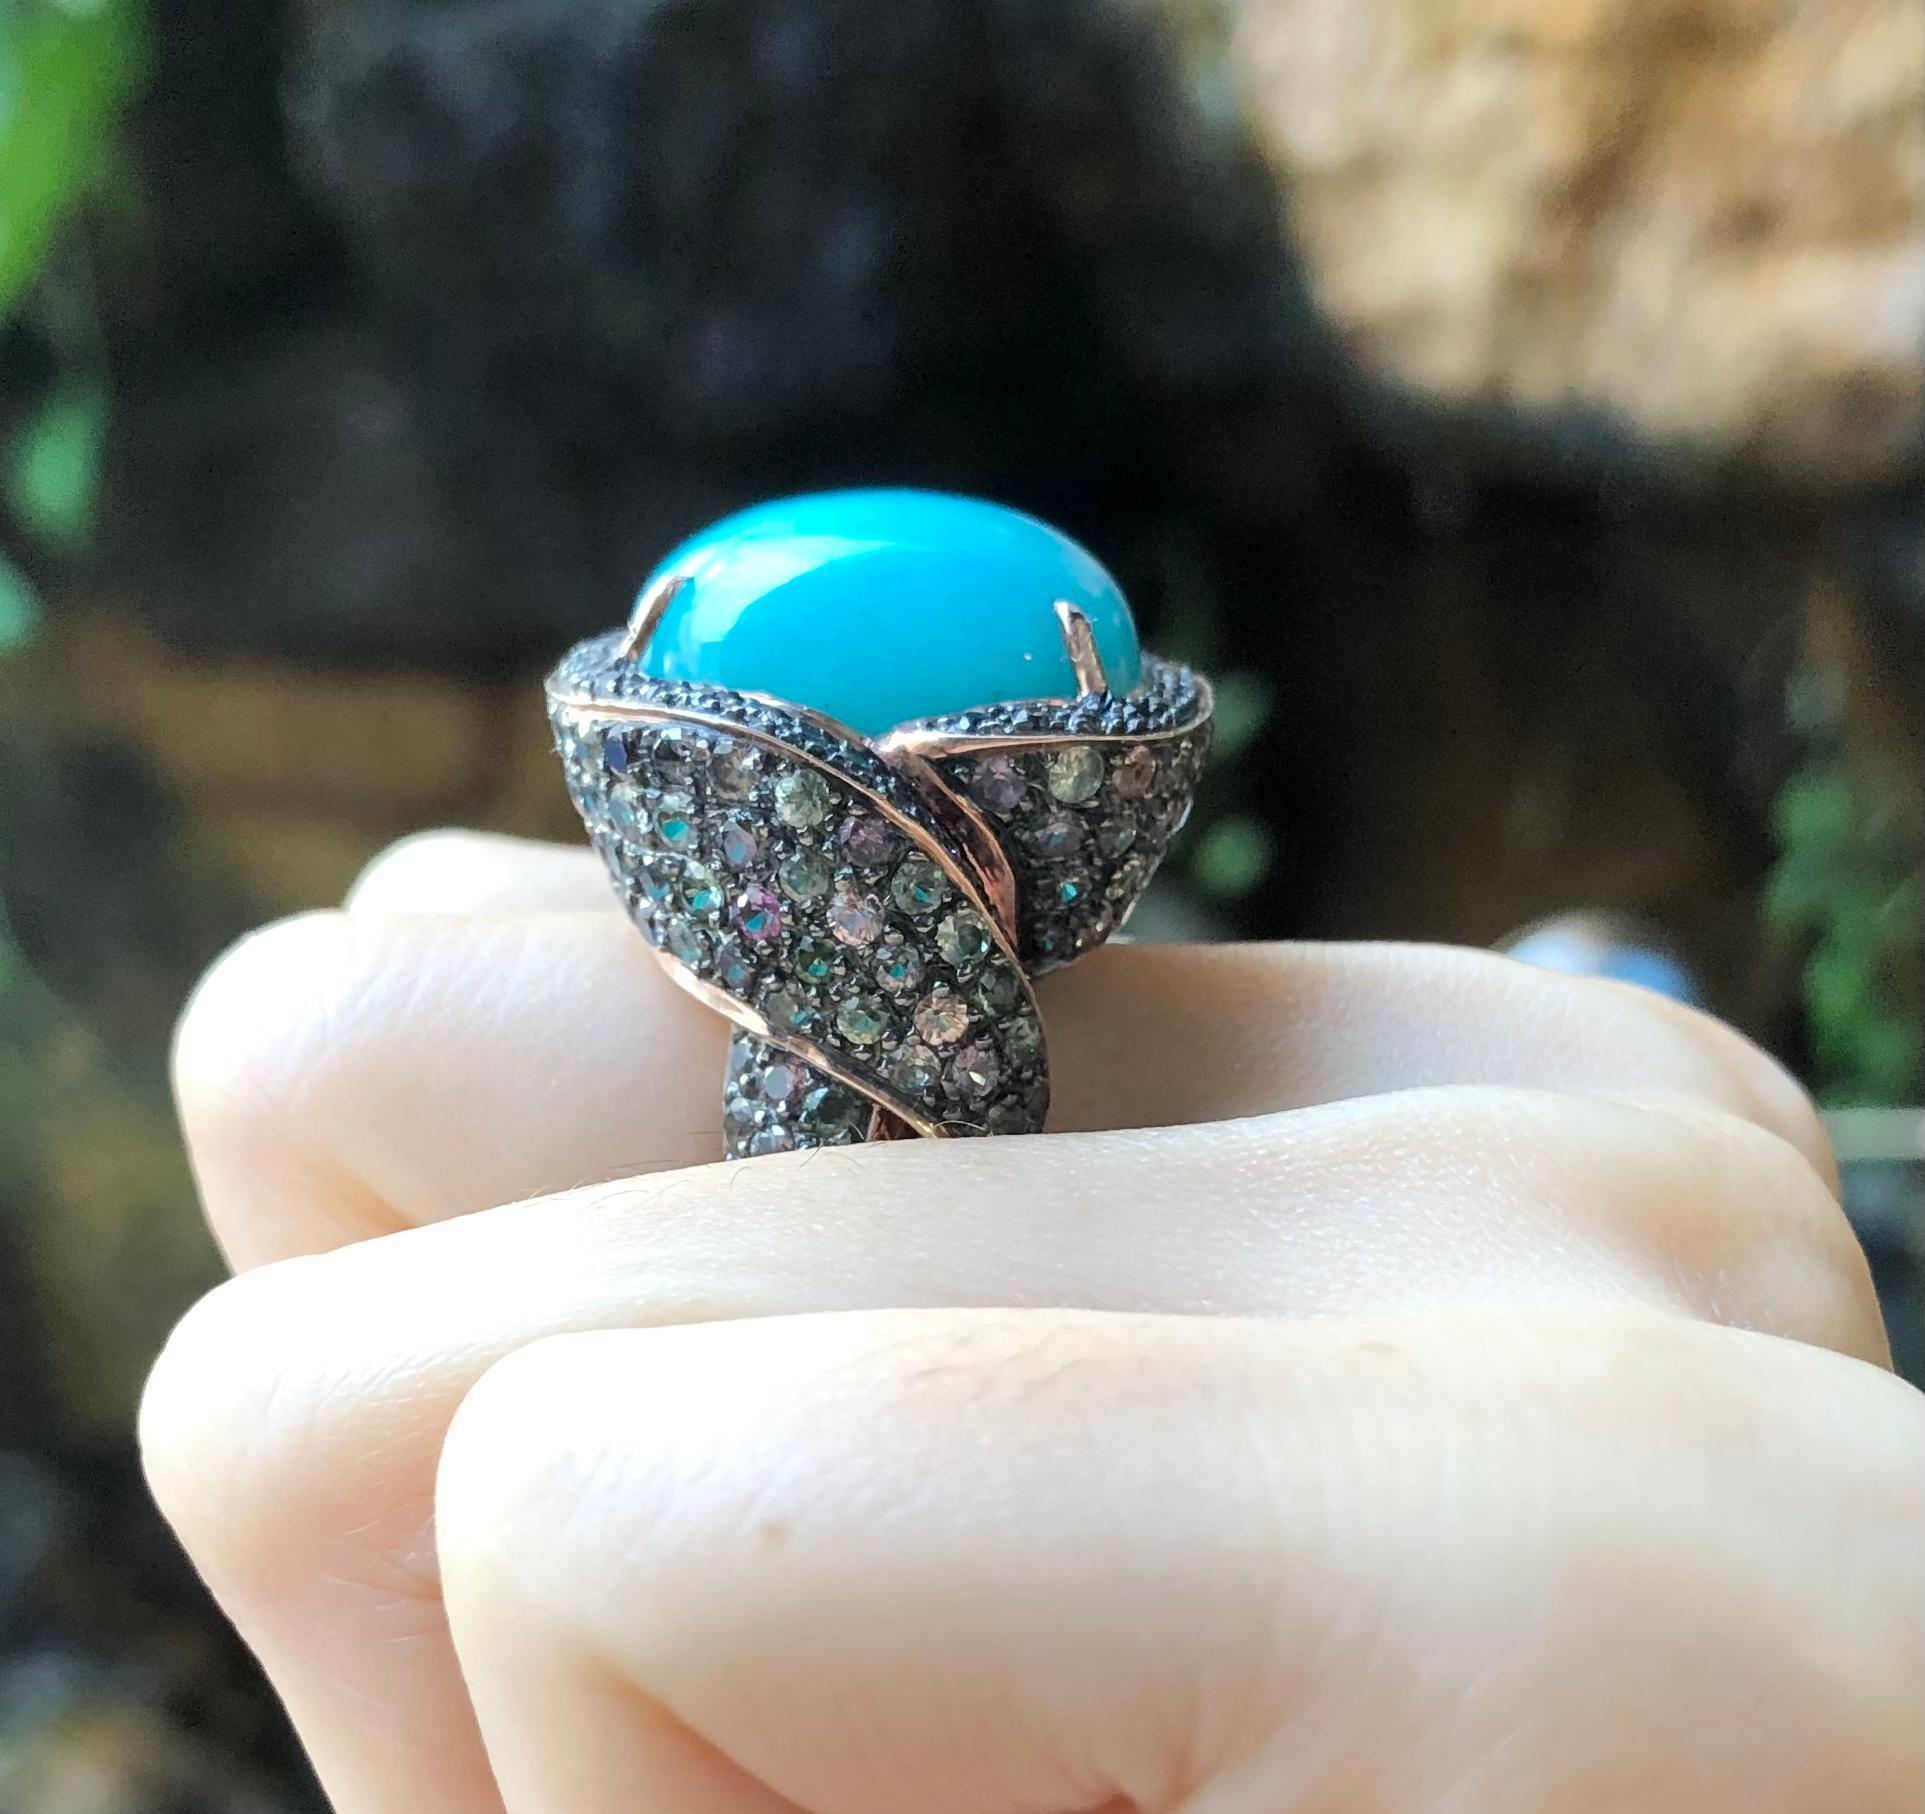 Amazonite with Rainbow Colour Sapphire 22.40 carats Ring set in Silver Settings

Width:  2.9 cm 
Length: 2.5 cm
Ring Size: 56
Total Weight: 17.31 grams

*Please note that the silver setting is plated with rhodium to promote shine and help prevent